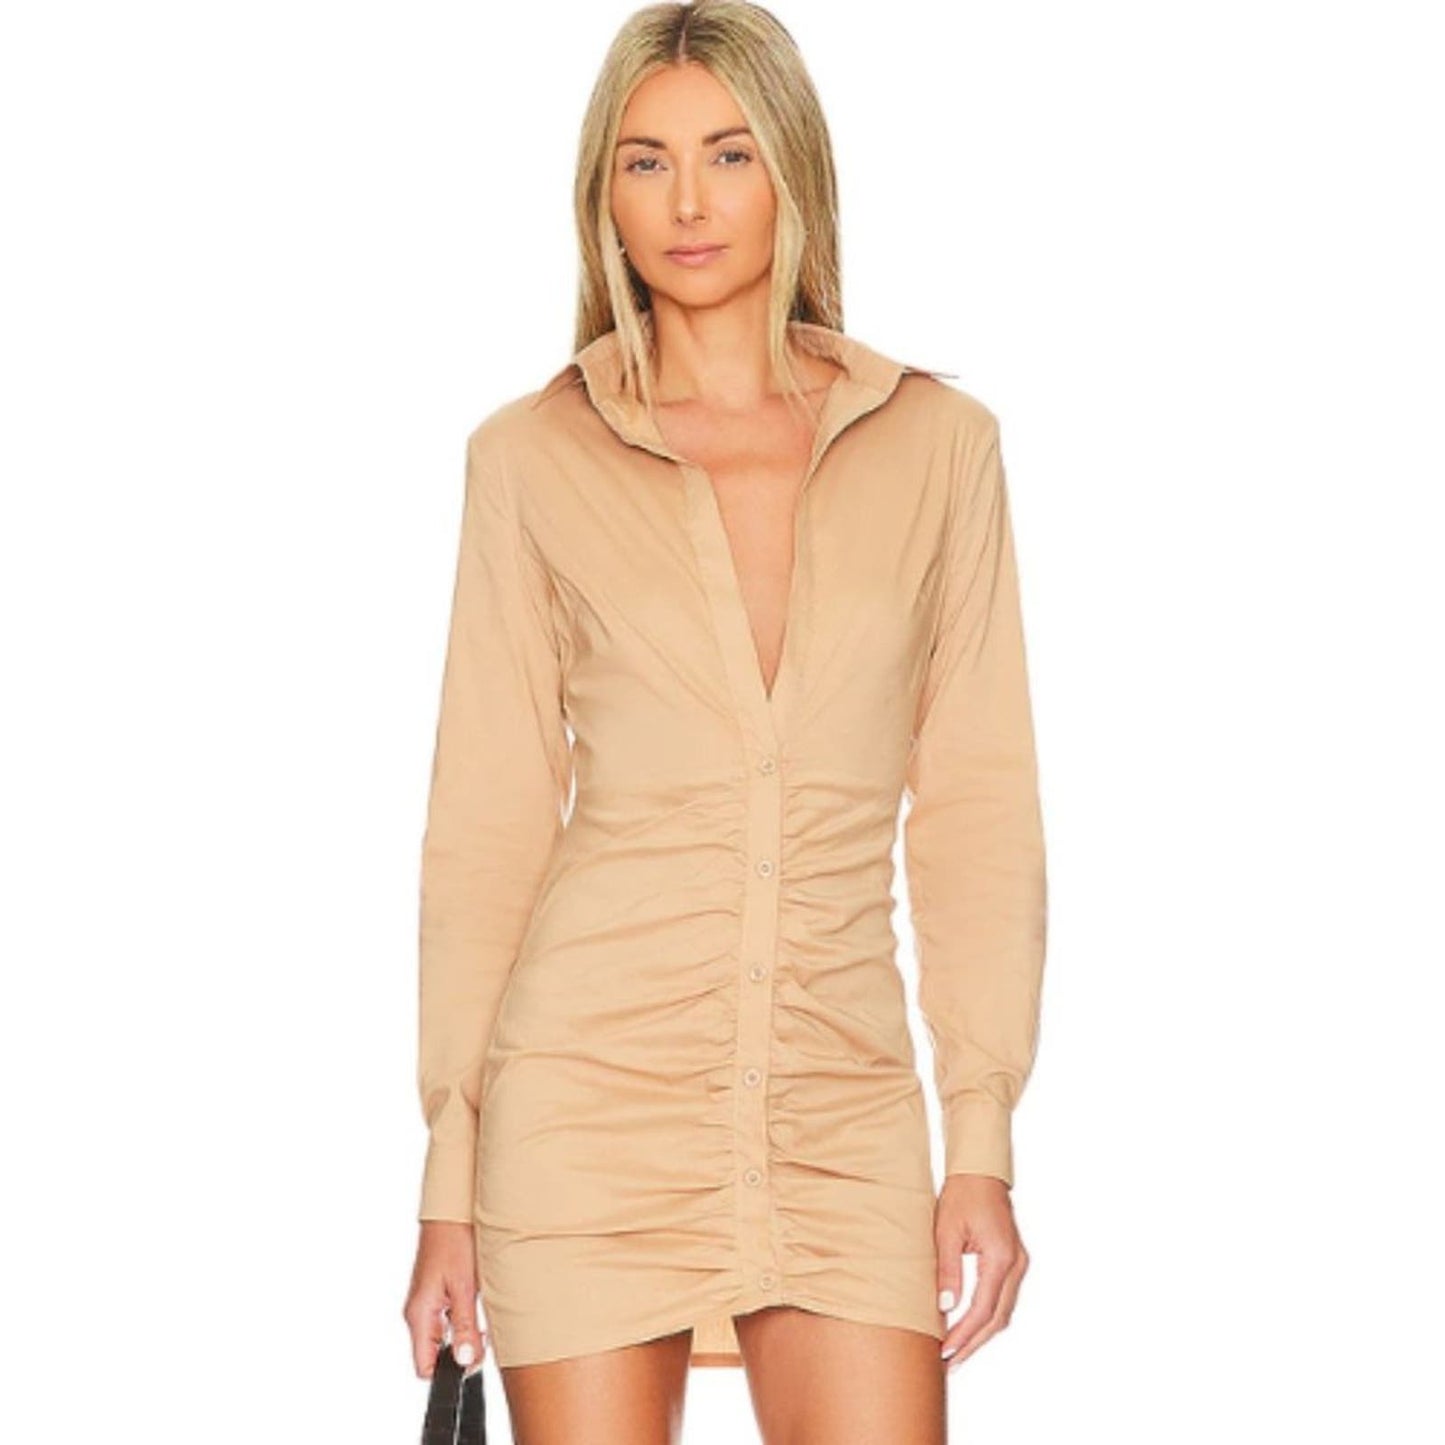 Superdown Colette Ruched Shirt Dress in Nude Tan NWT Size Small